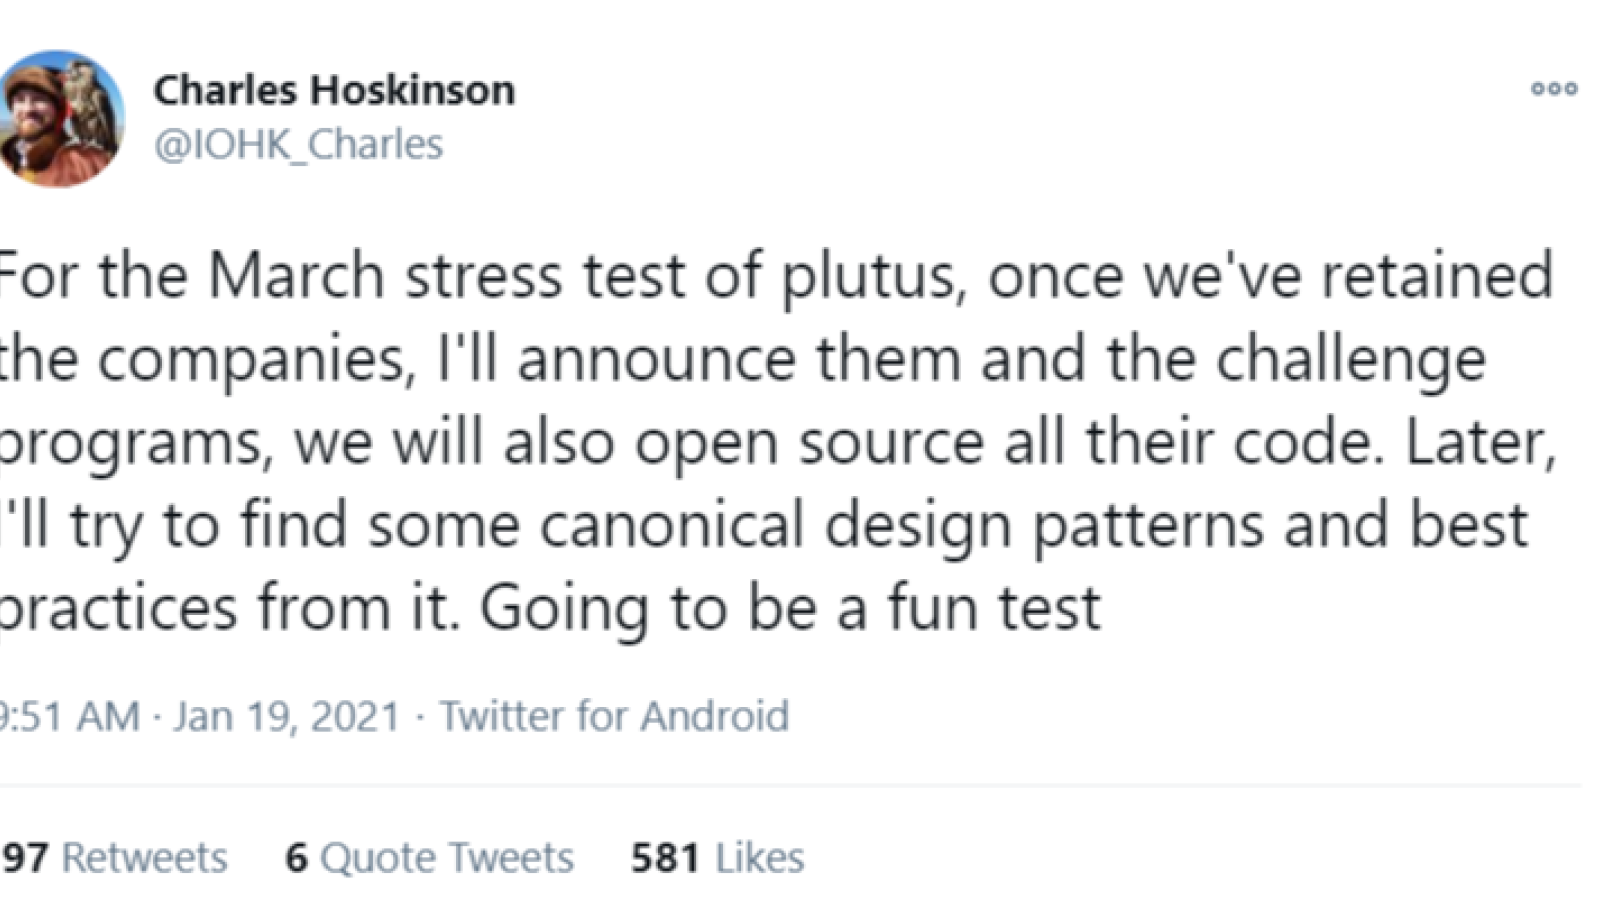 Charles Hoskinson shares the roadmap for Cardano's Plutus stress-tests